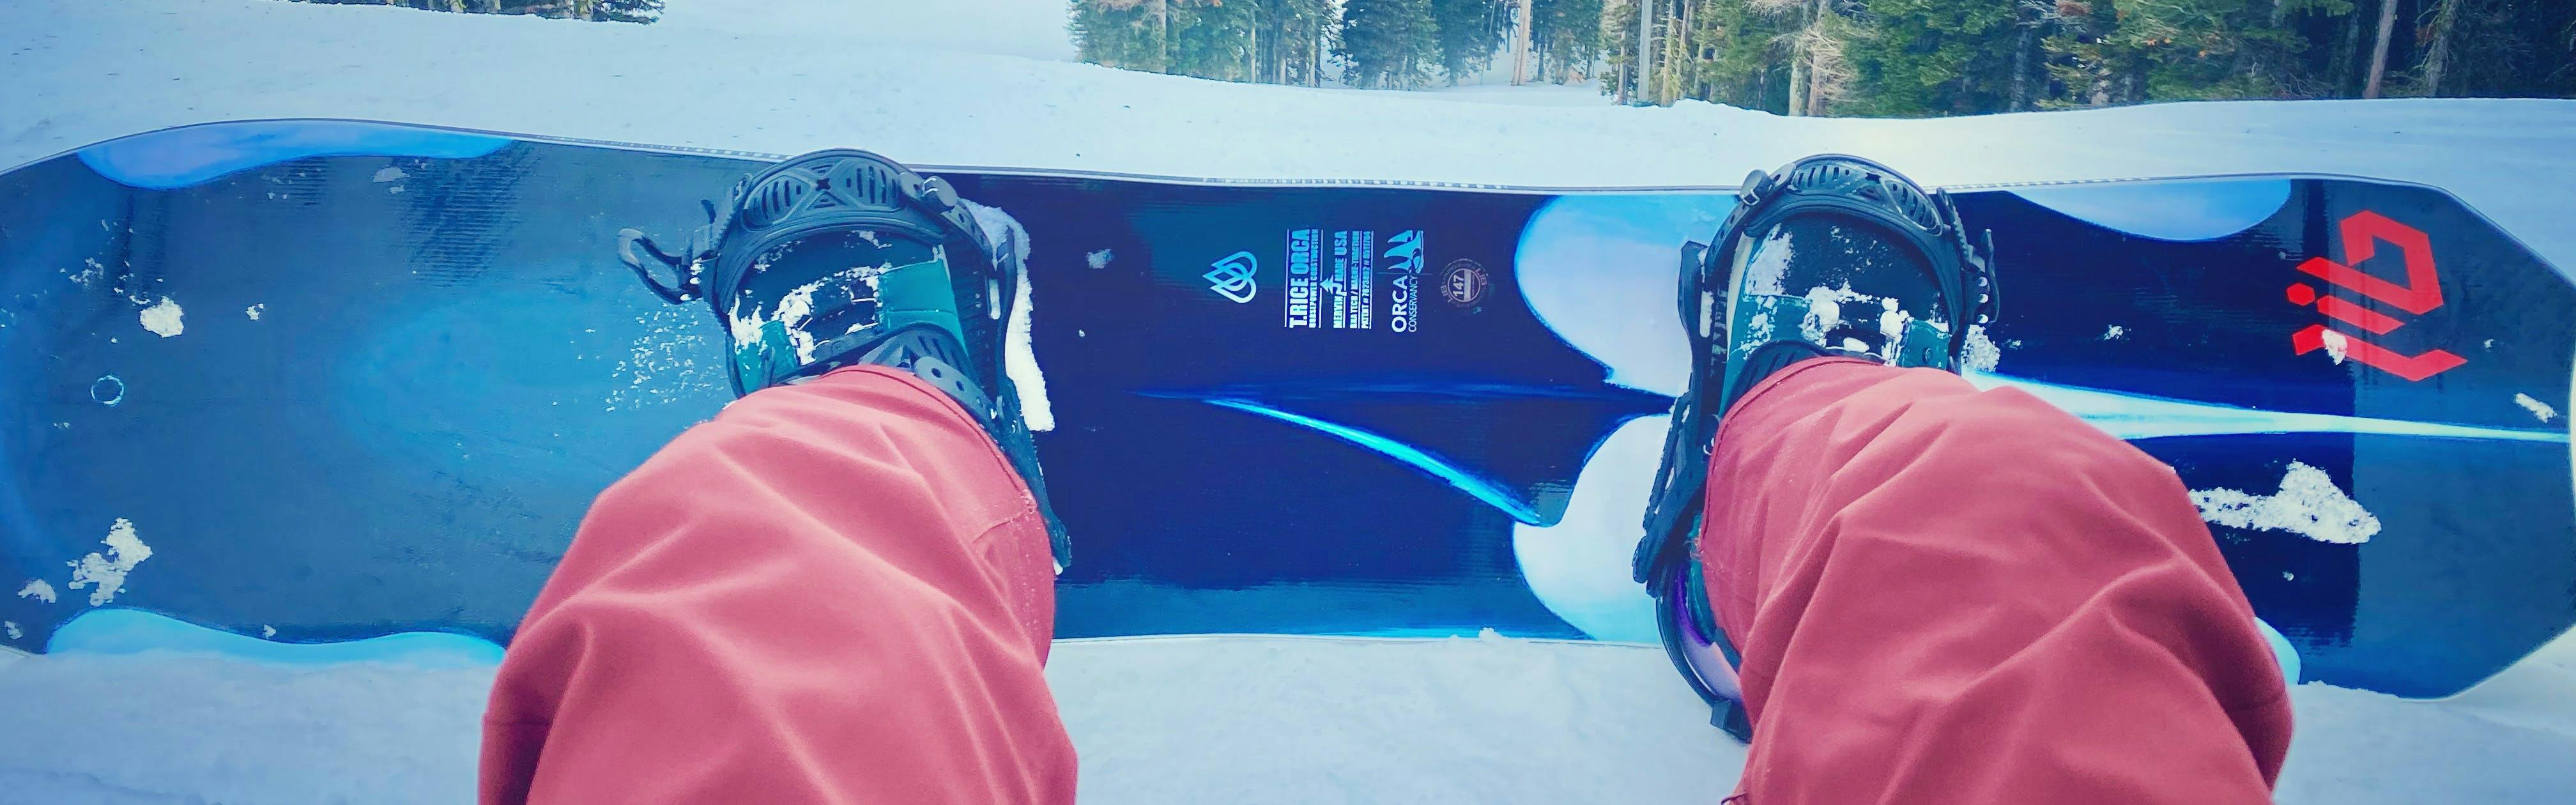 Top down view of the Lib tech Orca Snowboard on a mountain.